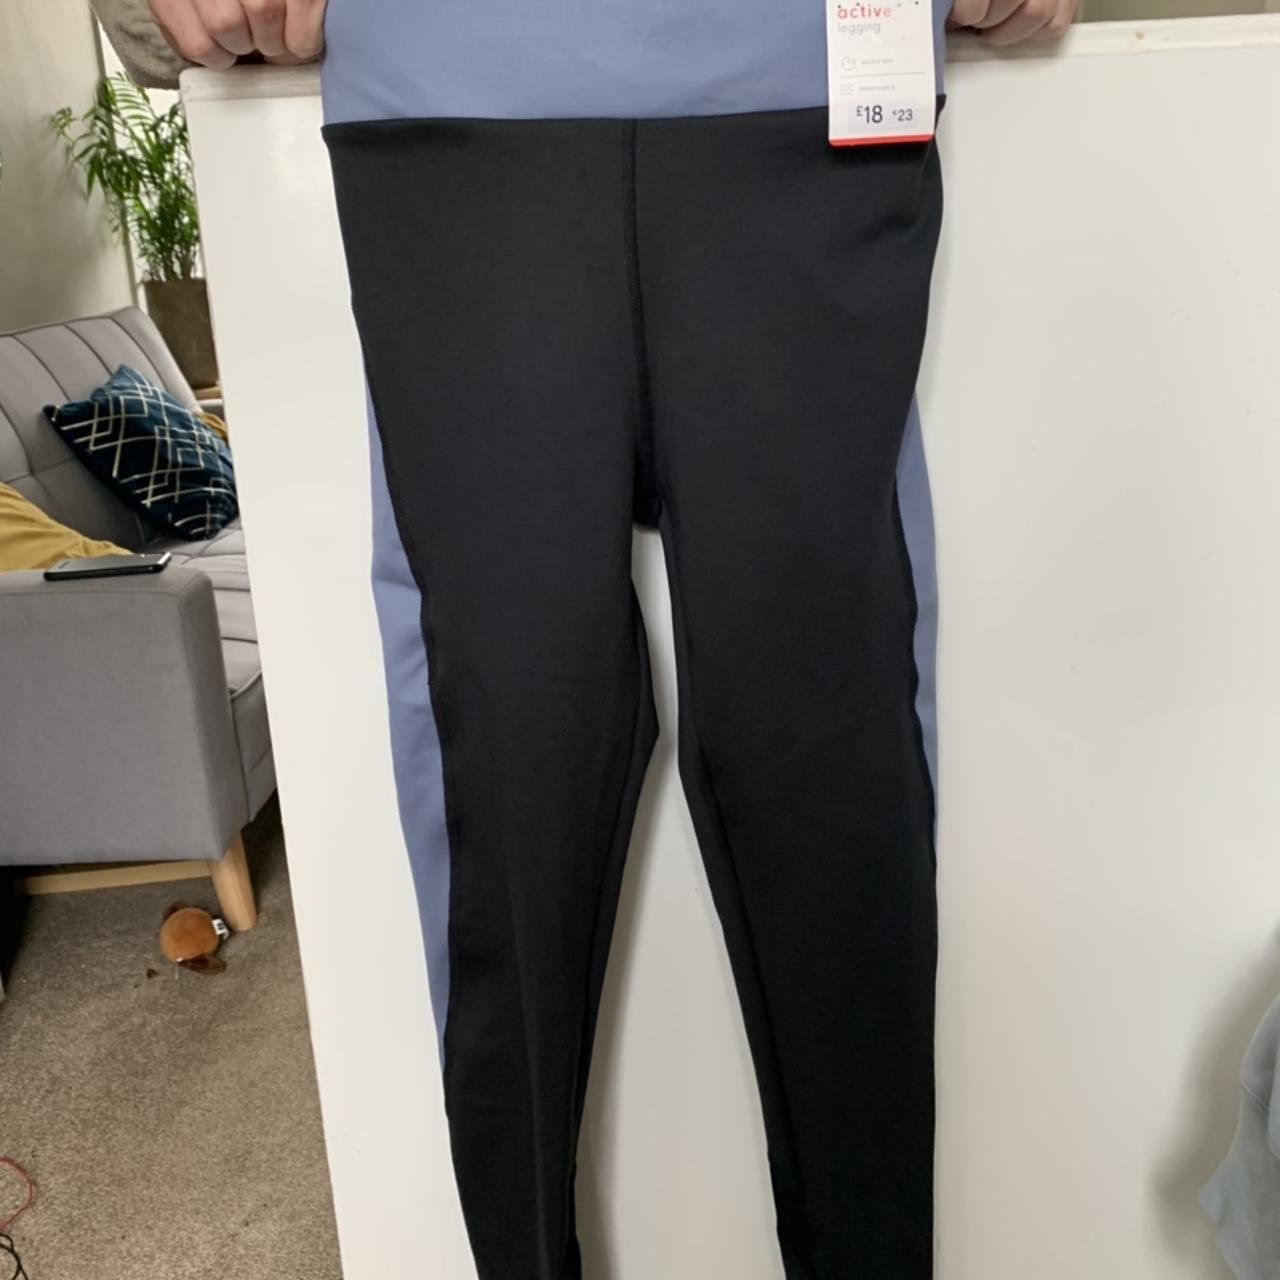 Tesco F&F gym leggings, never worn as they are too